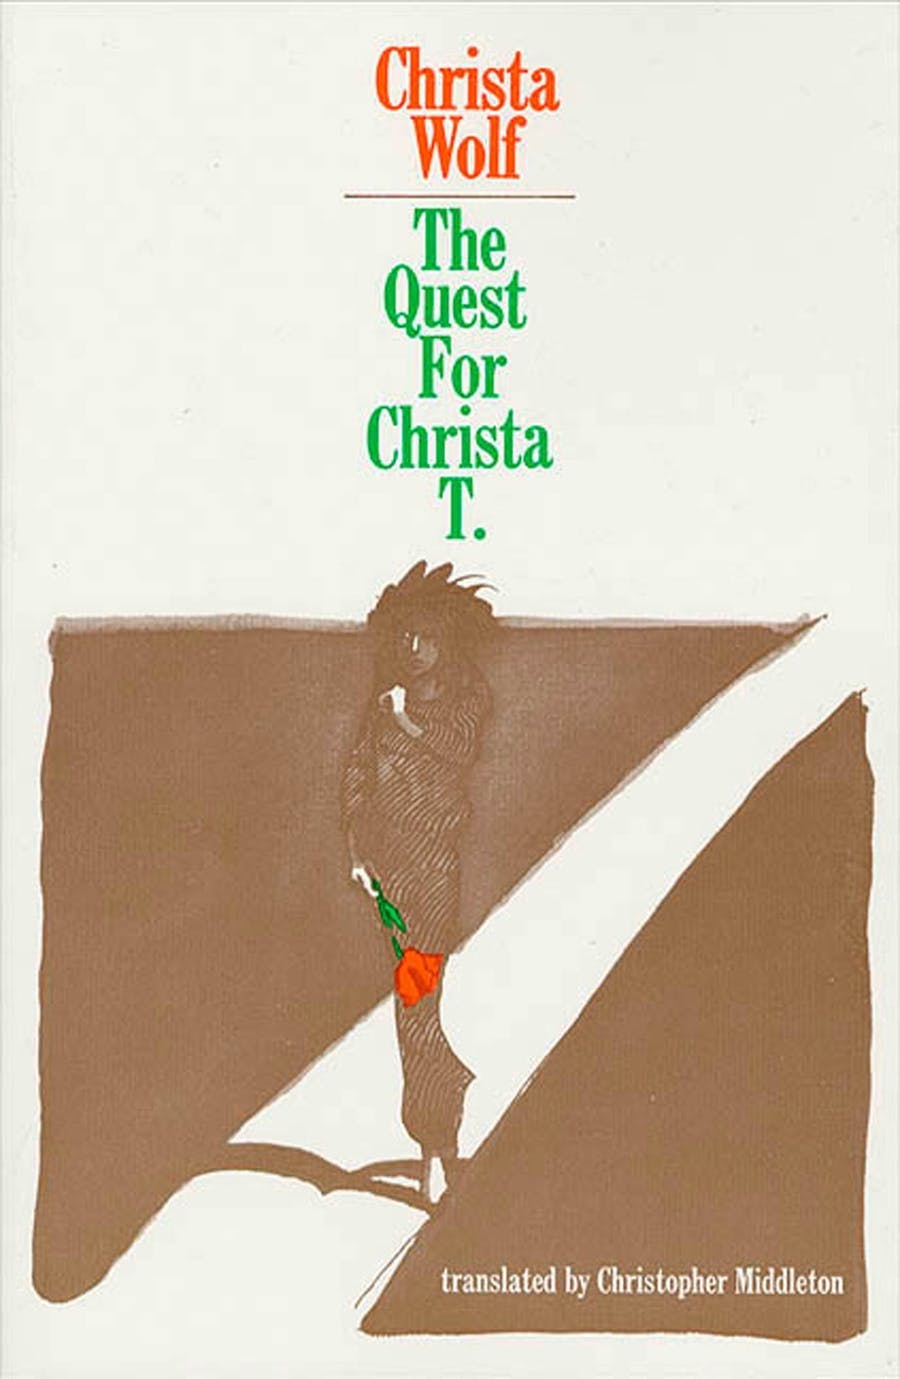 The Quest for Christa T. by Christa Wolf